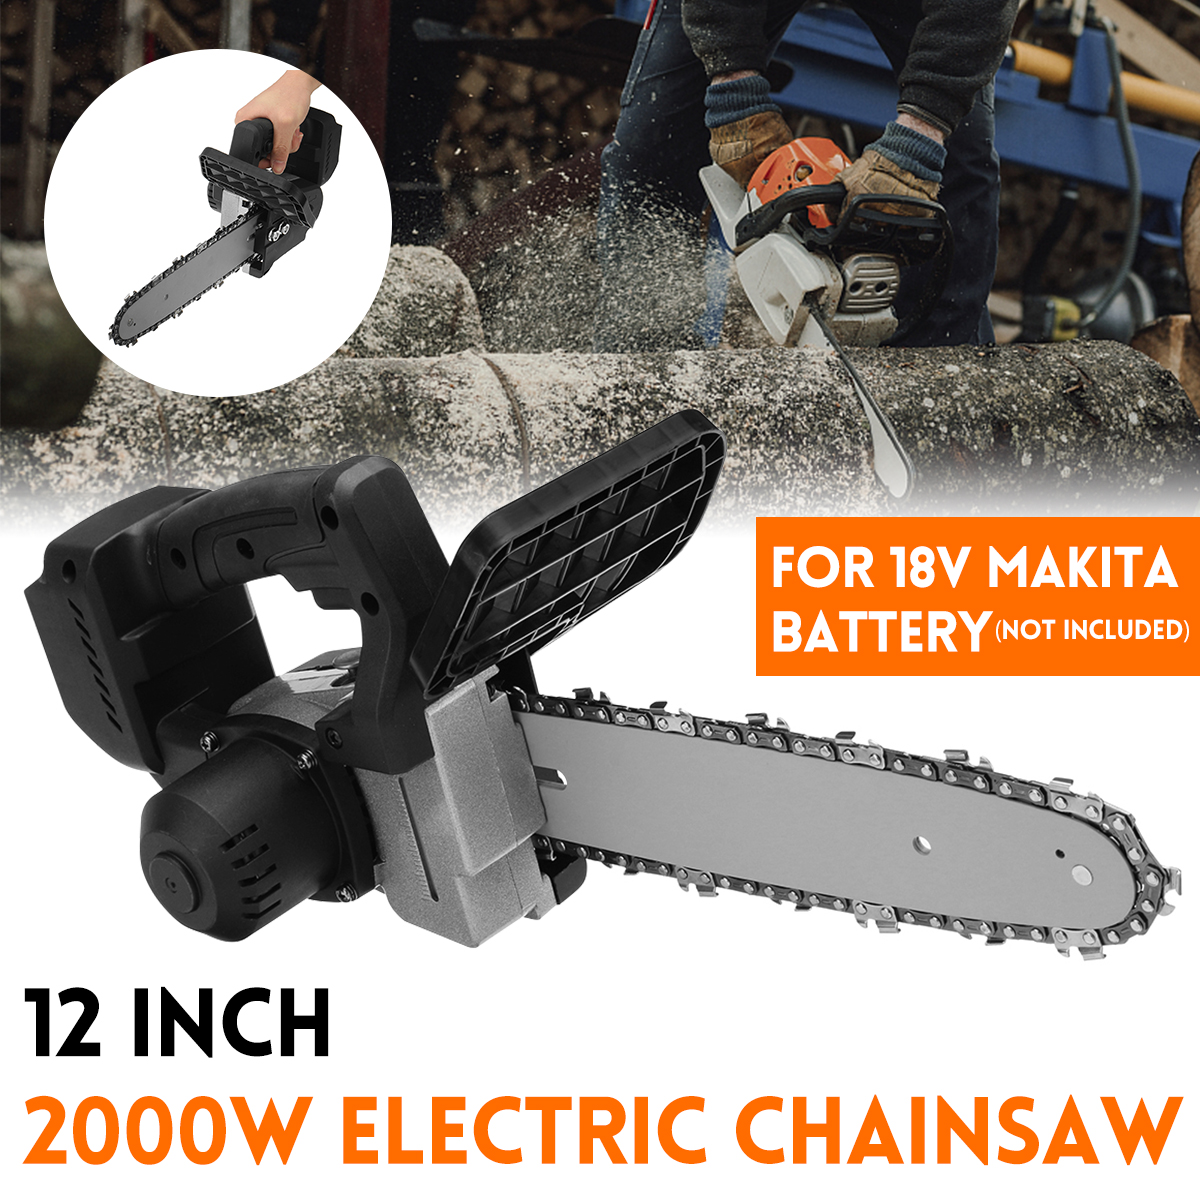 2000W-12Inch-Electric-Chainsaw-Wood-Cutter-Woodworking-Chain-Saw-for-Makita-18V-Battery-1823404-2